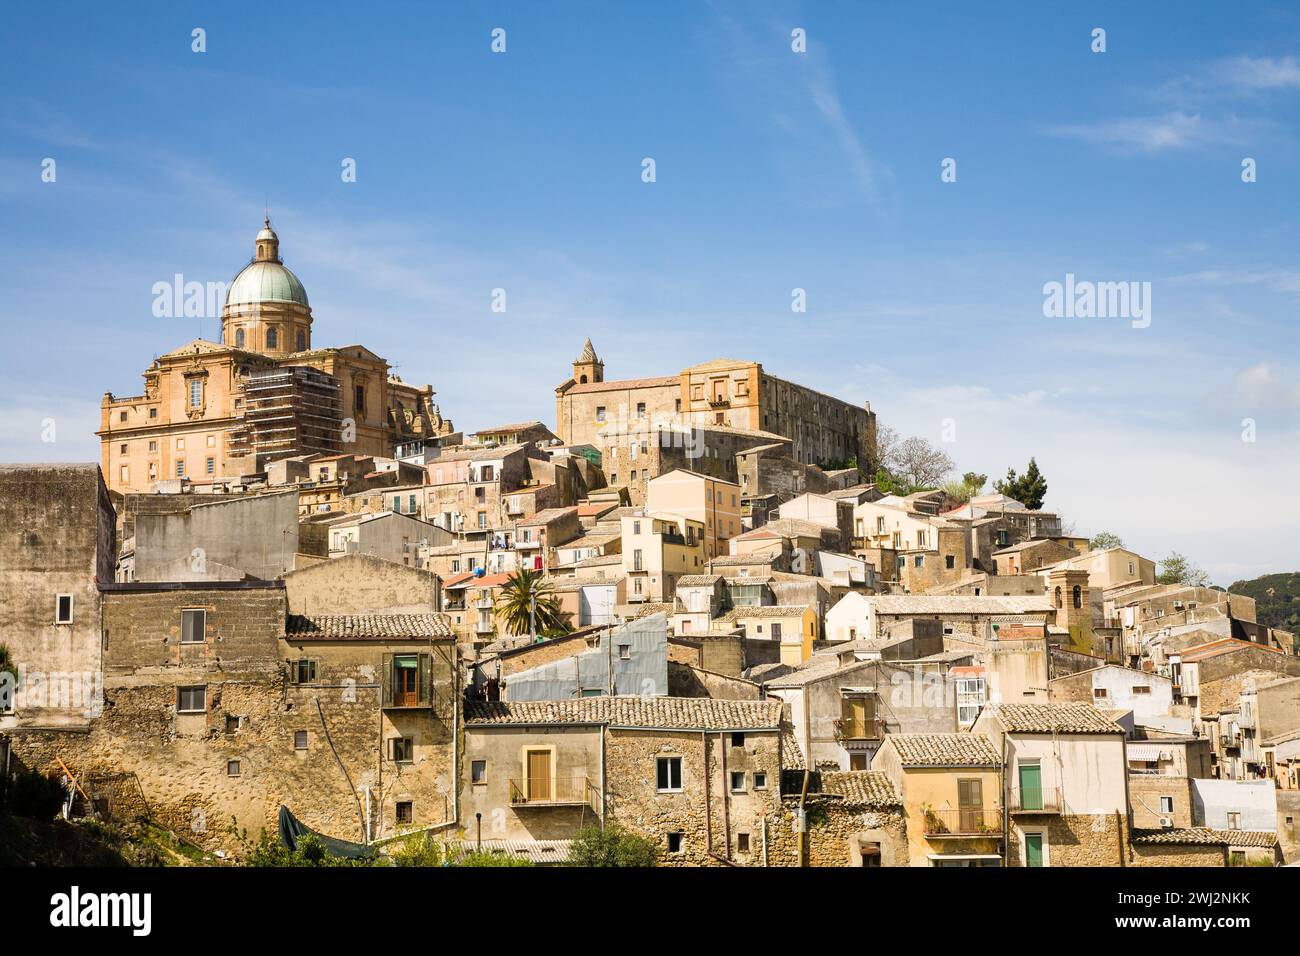 The skyline of the hilltop village called Piazza Armerina in the Enna province of central Sicily in Italy Stock Photo